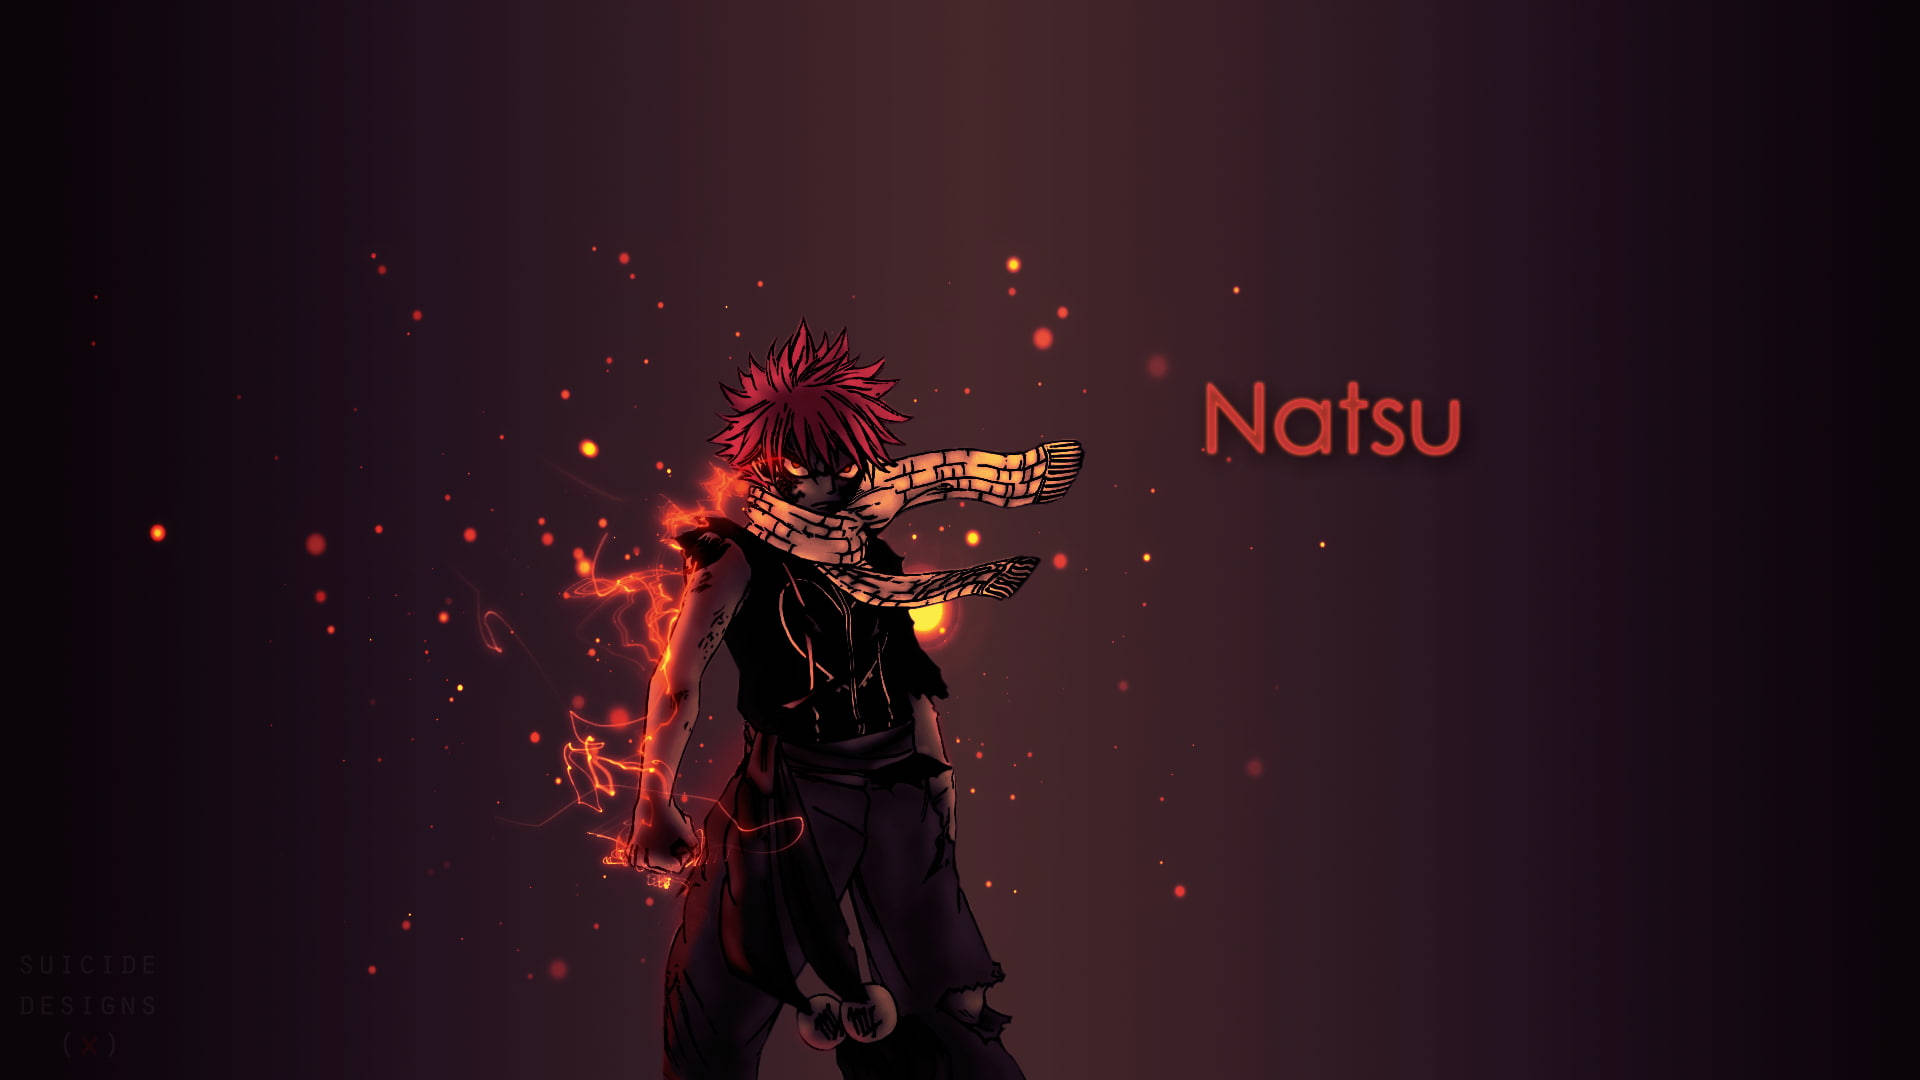 Fairy Tail Character Natsu Dragneel